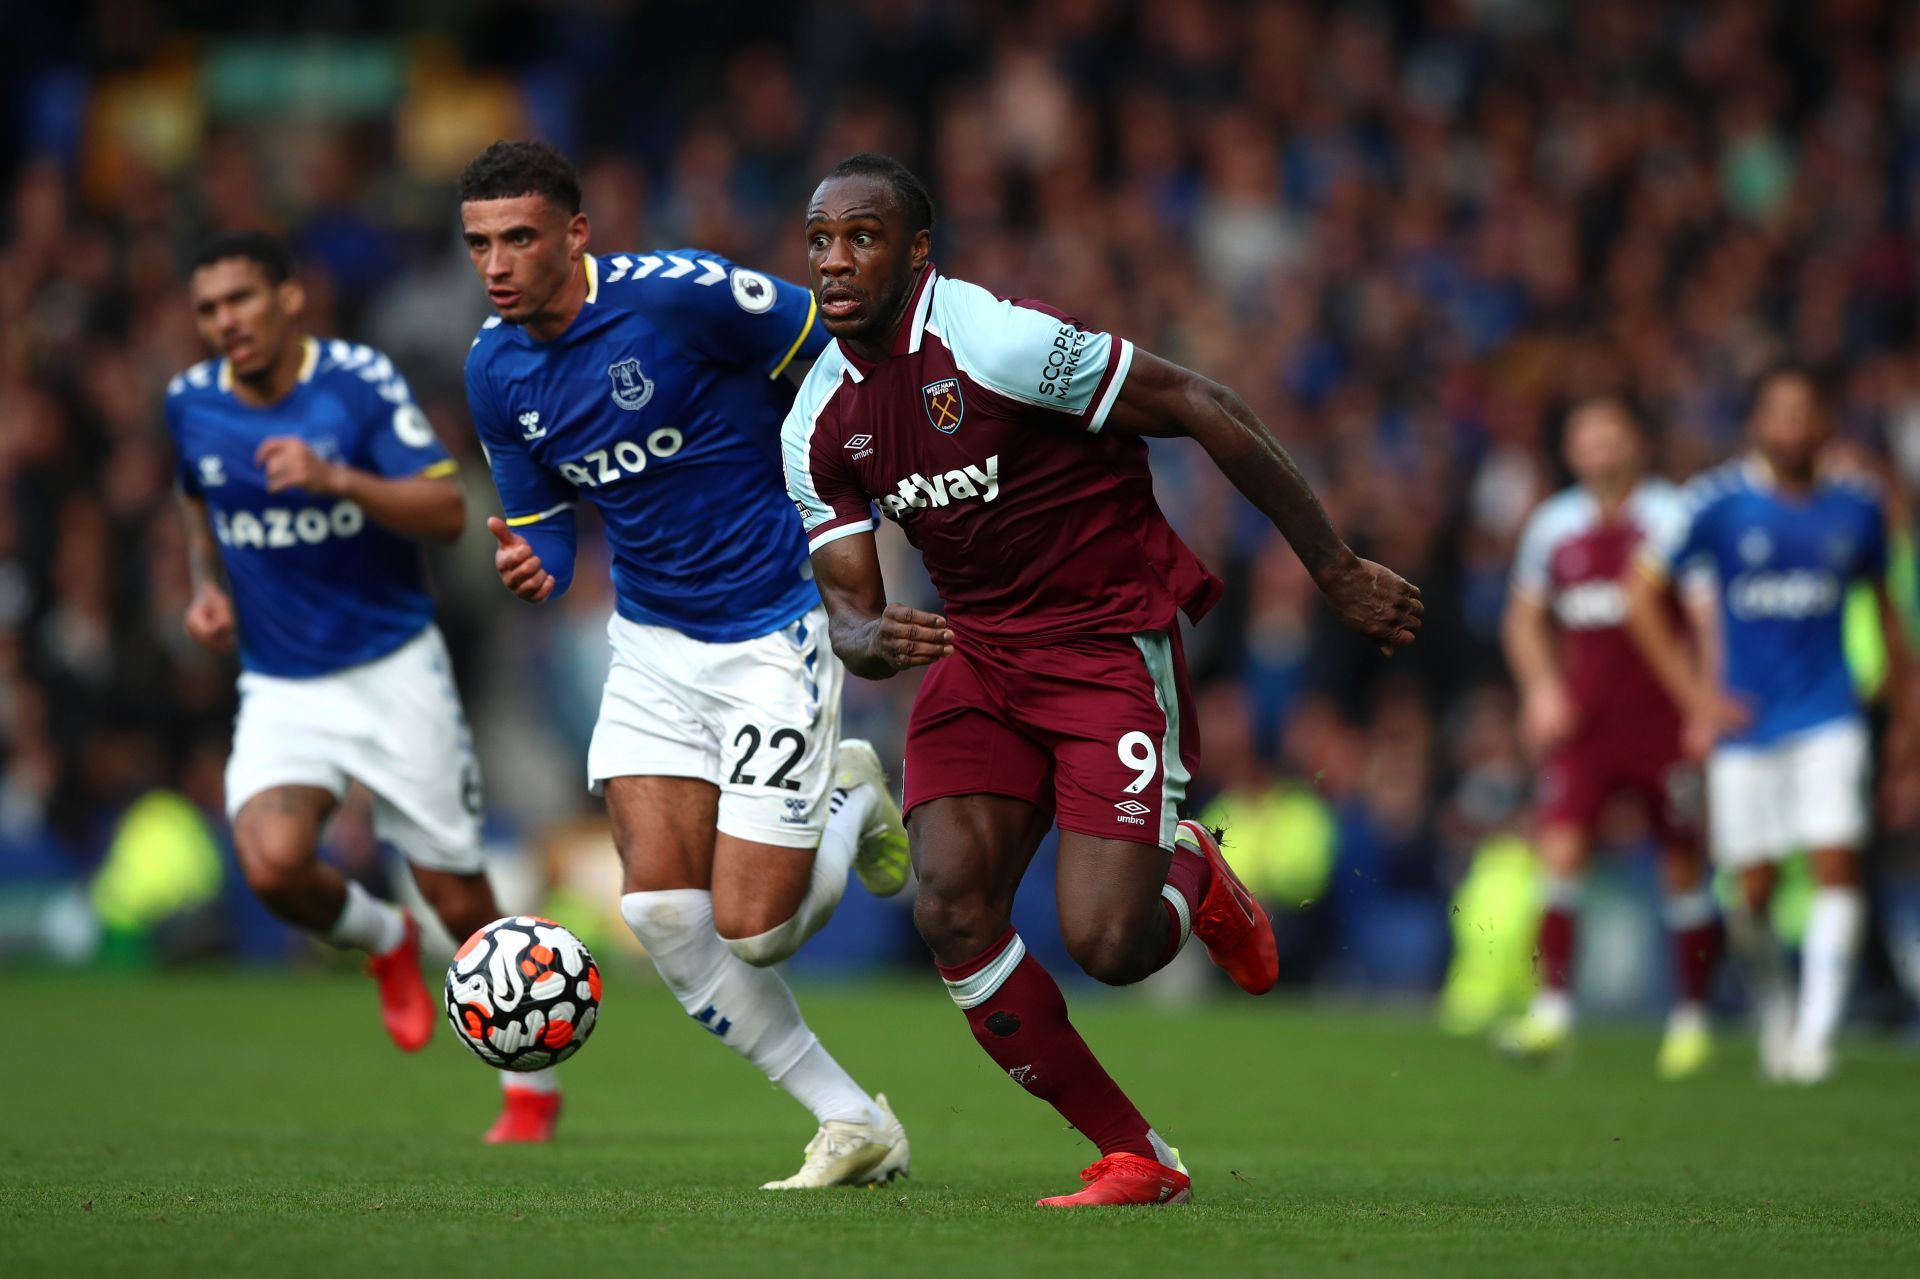 Everton take on West Ham United this weekend